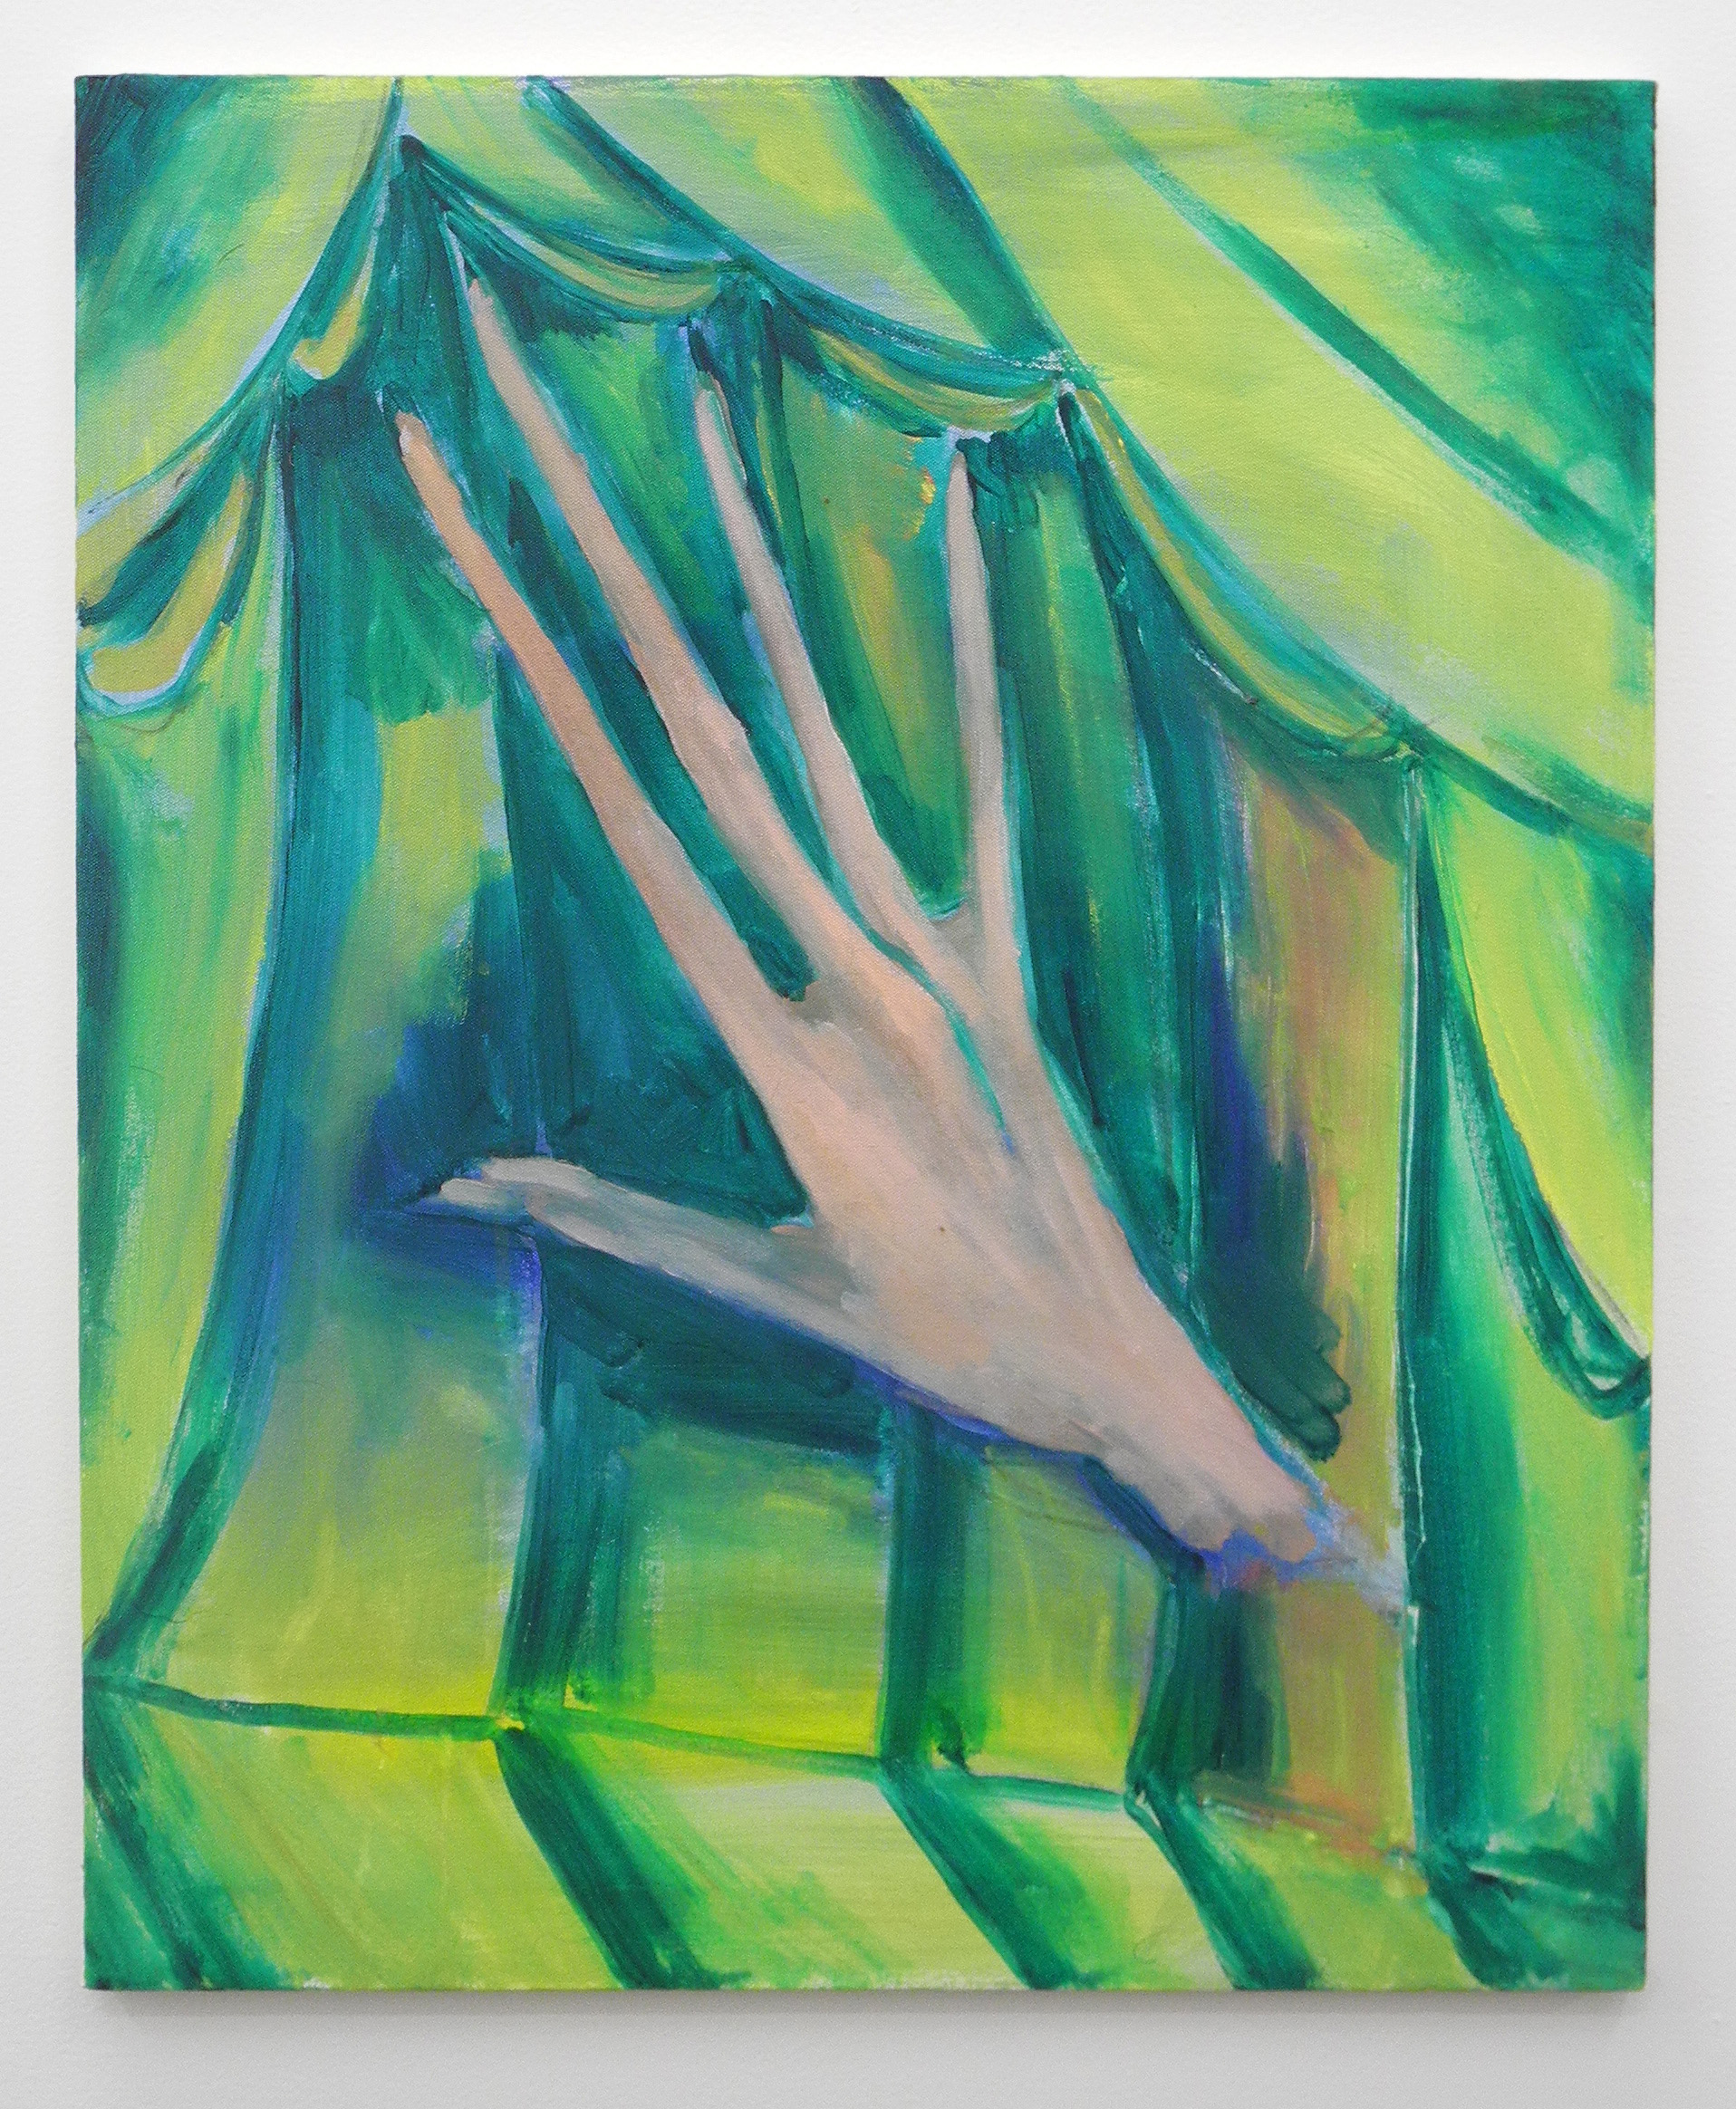 david_armacost-06_UNTITLED_GREEN_CURTAIN_2015_ACRYLIC_ON_CANVAS